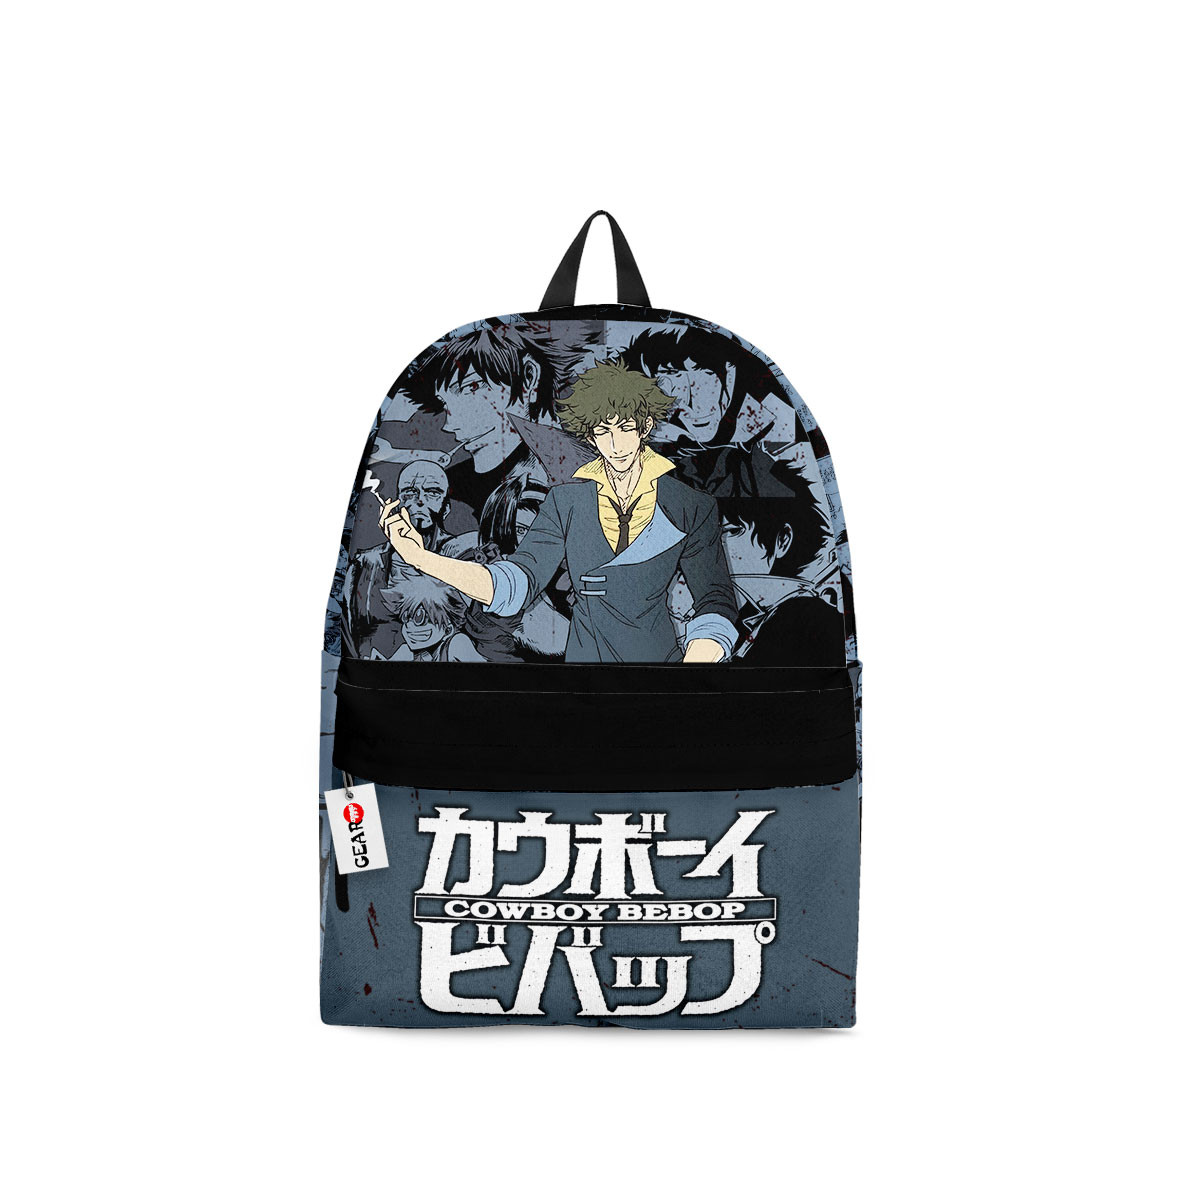 Latest Anime style products 251